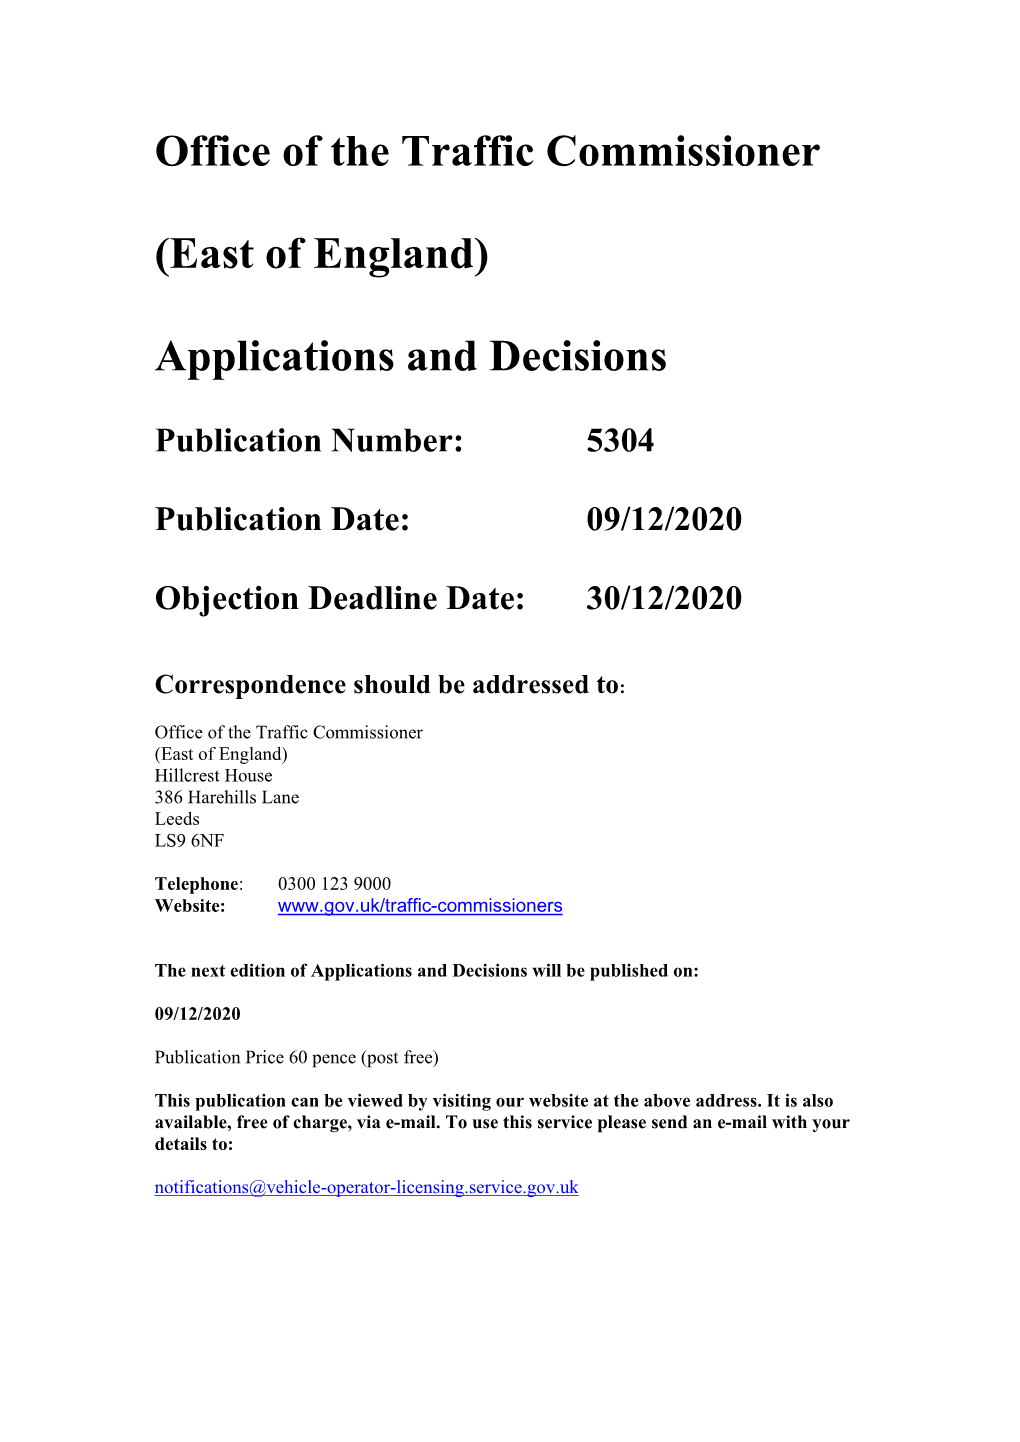 Office of the Traffic Commissioner (East of England) Applications and Decisions